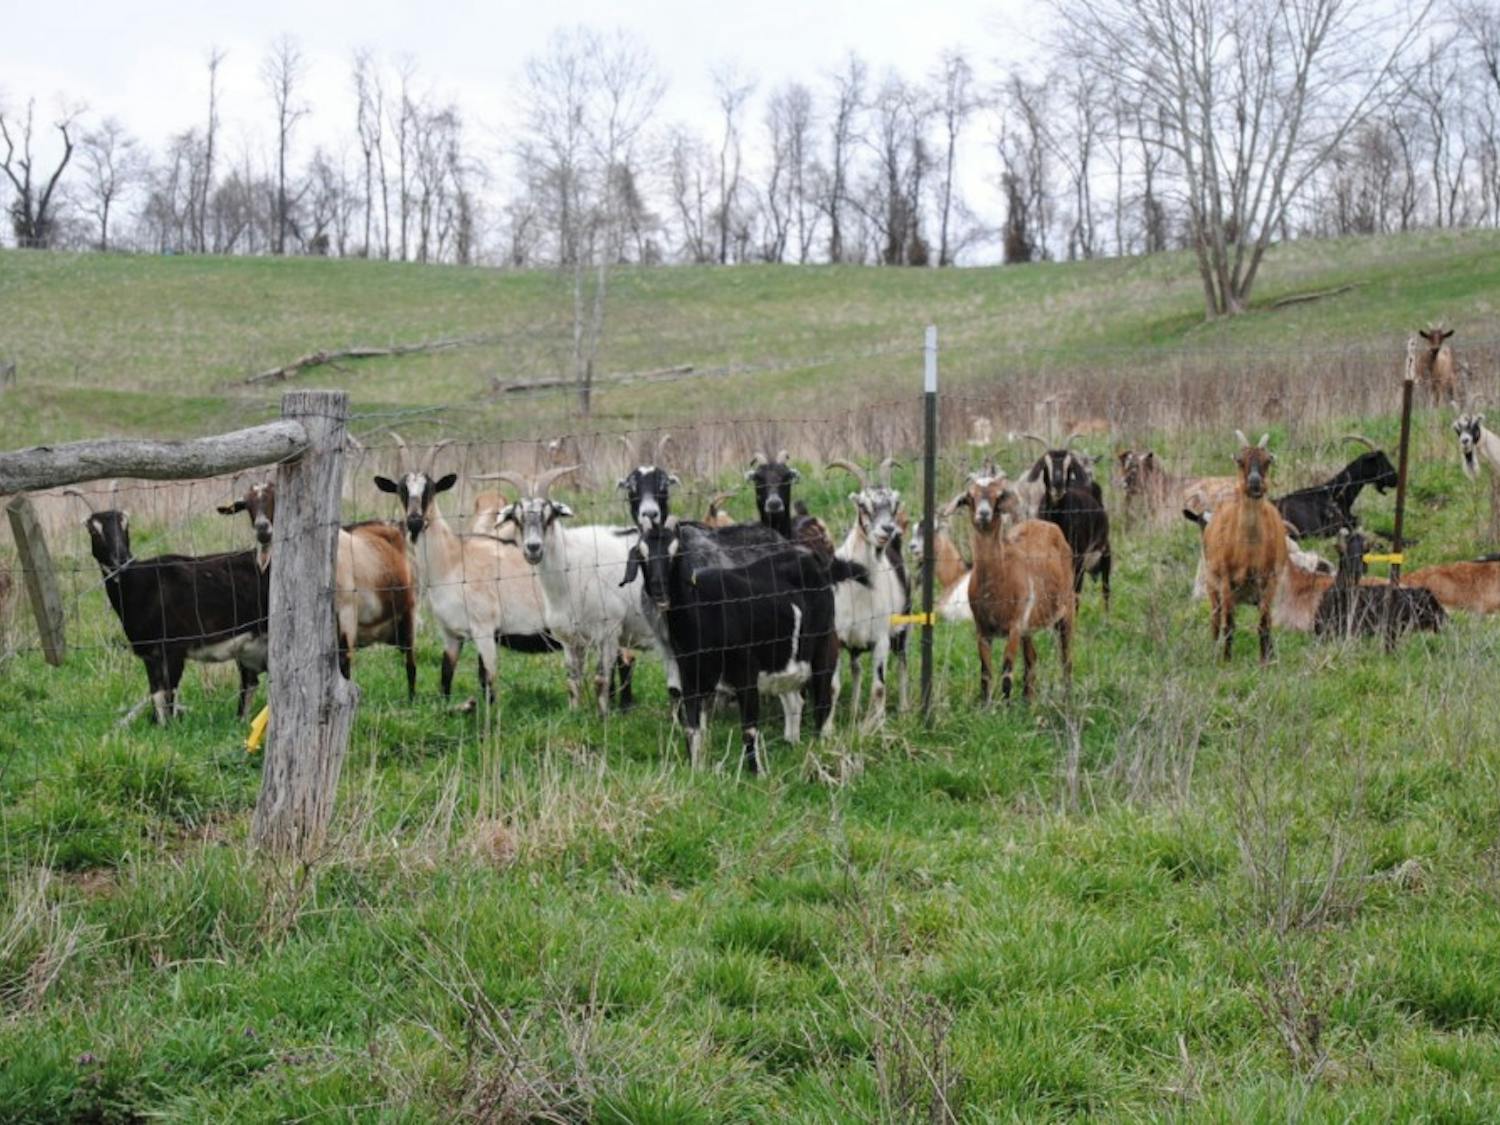 The goats of Integration Acres  